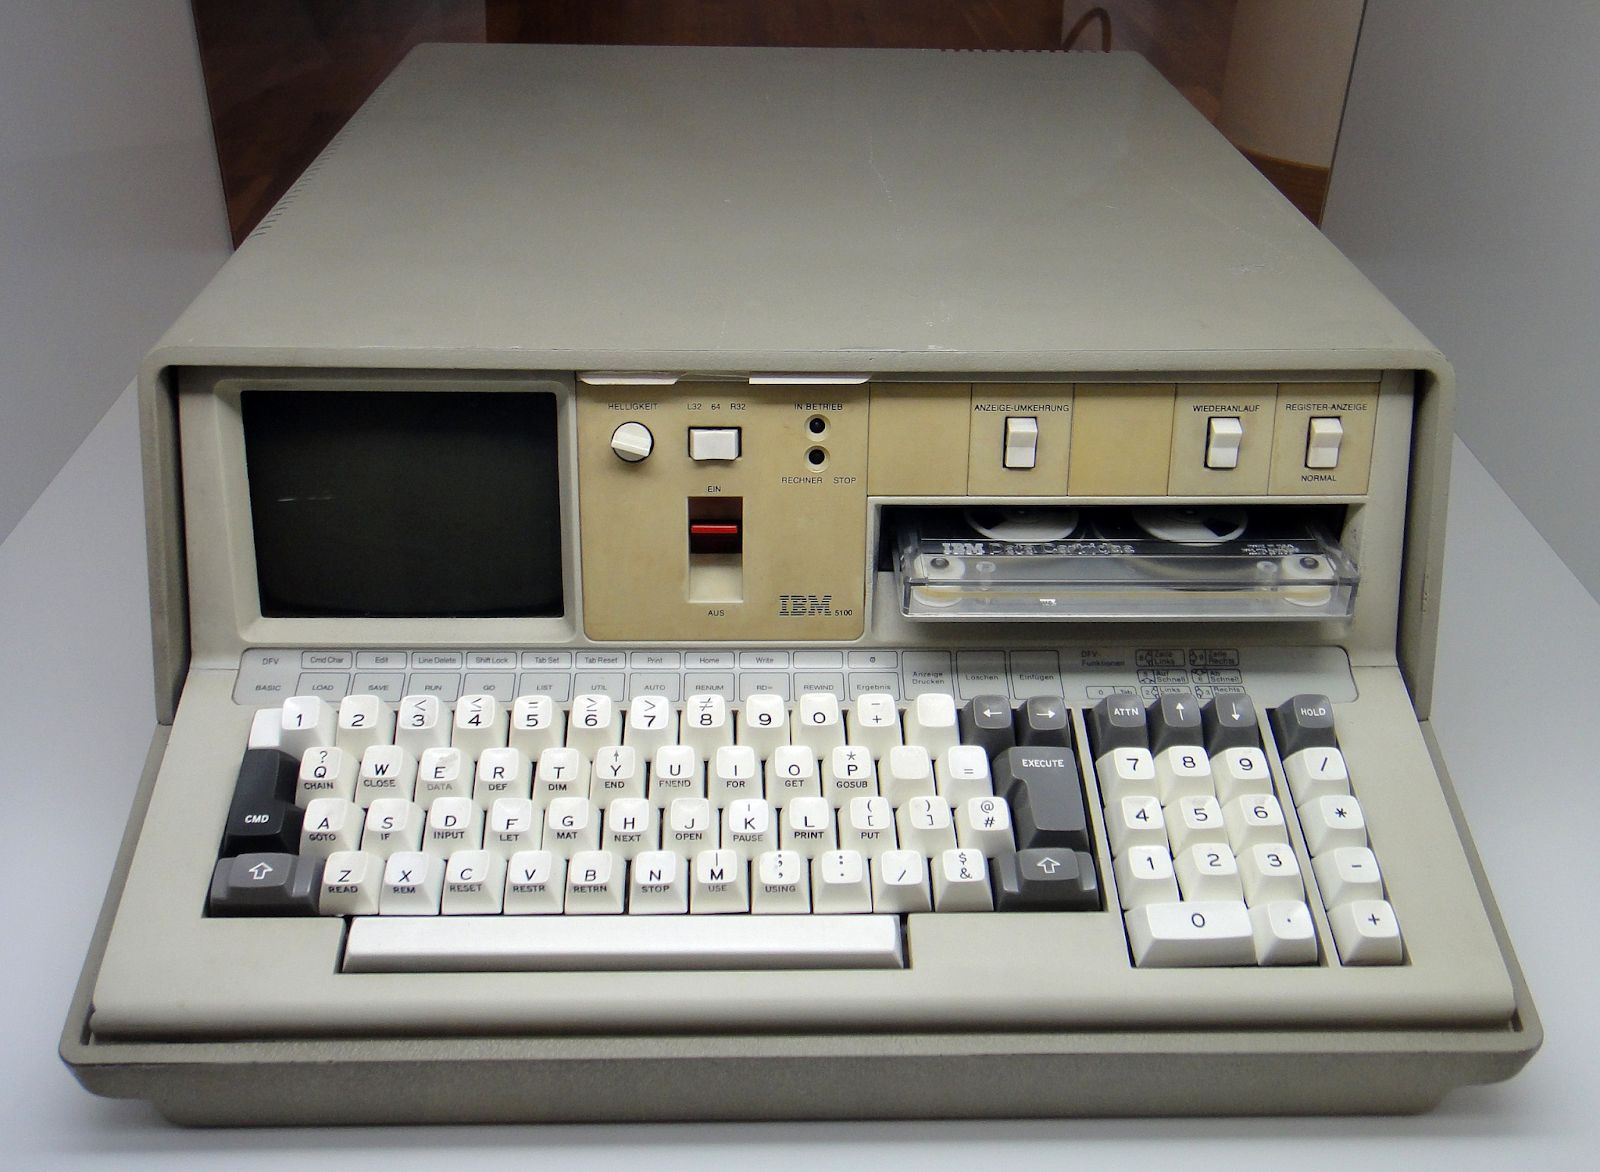 The “portable” IBM 5100 from 1977